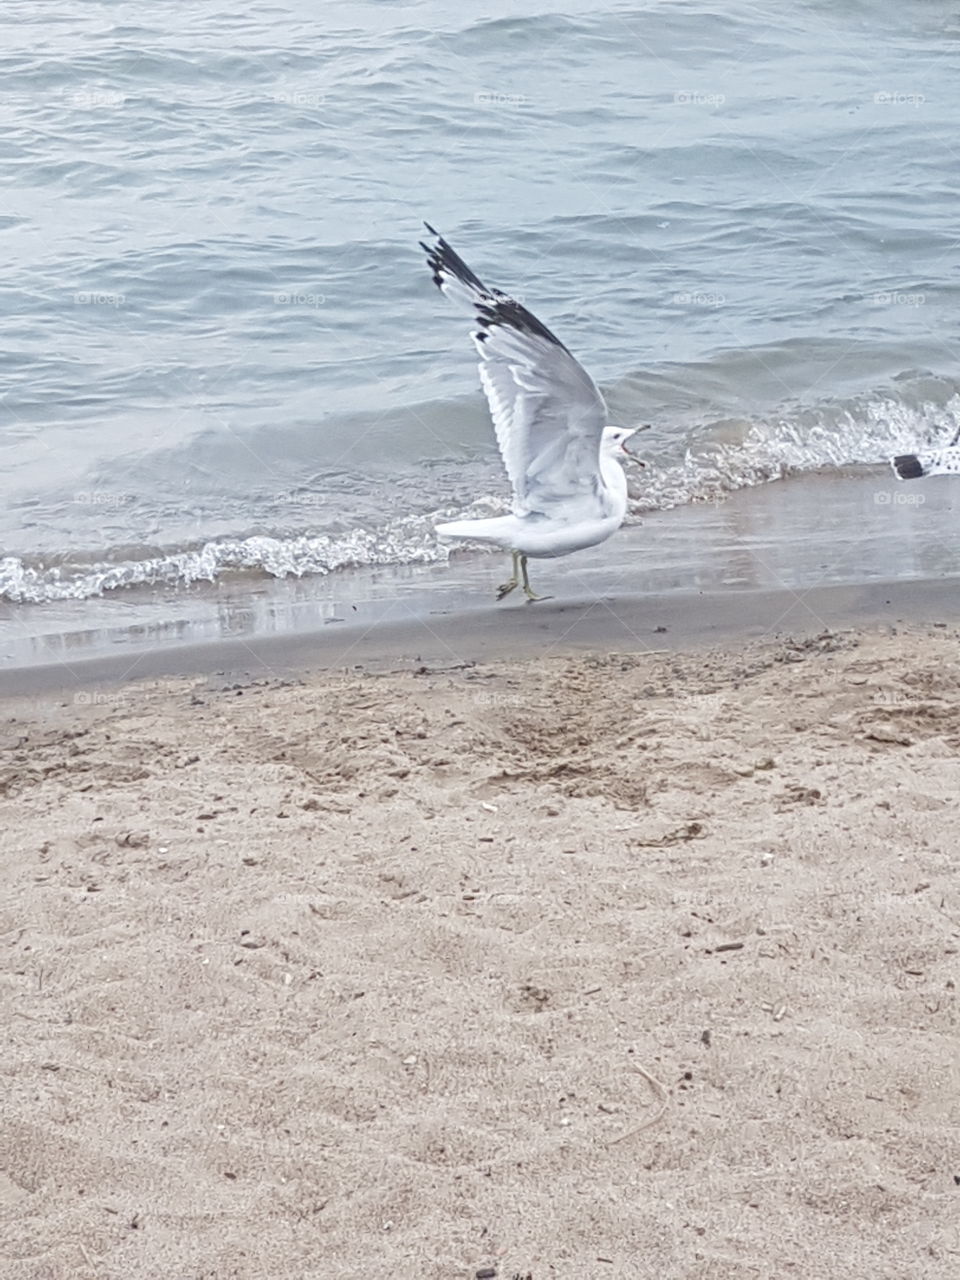 Seagull in action at the beach